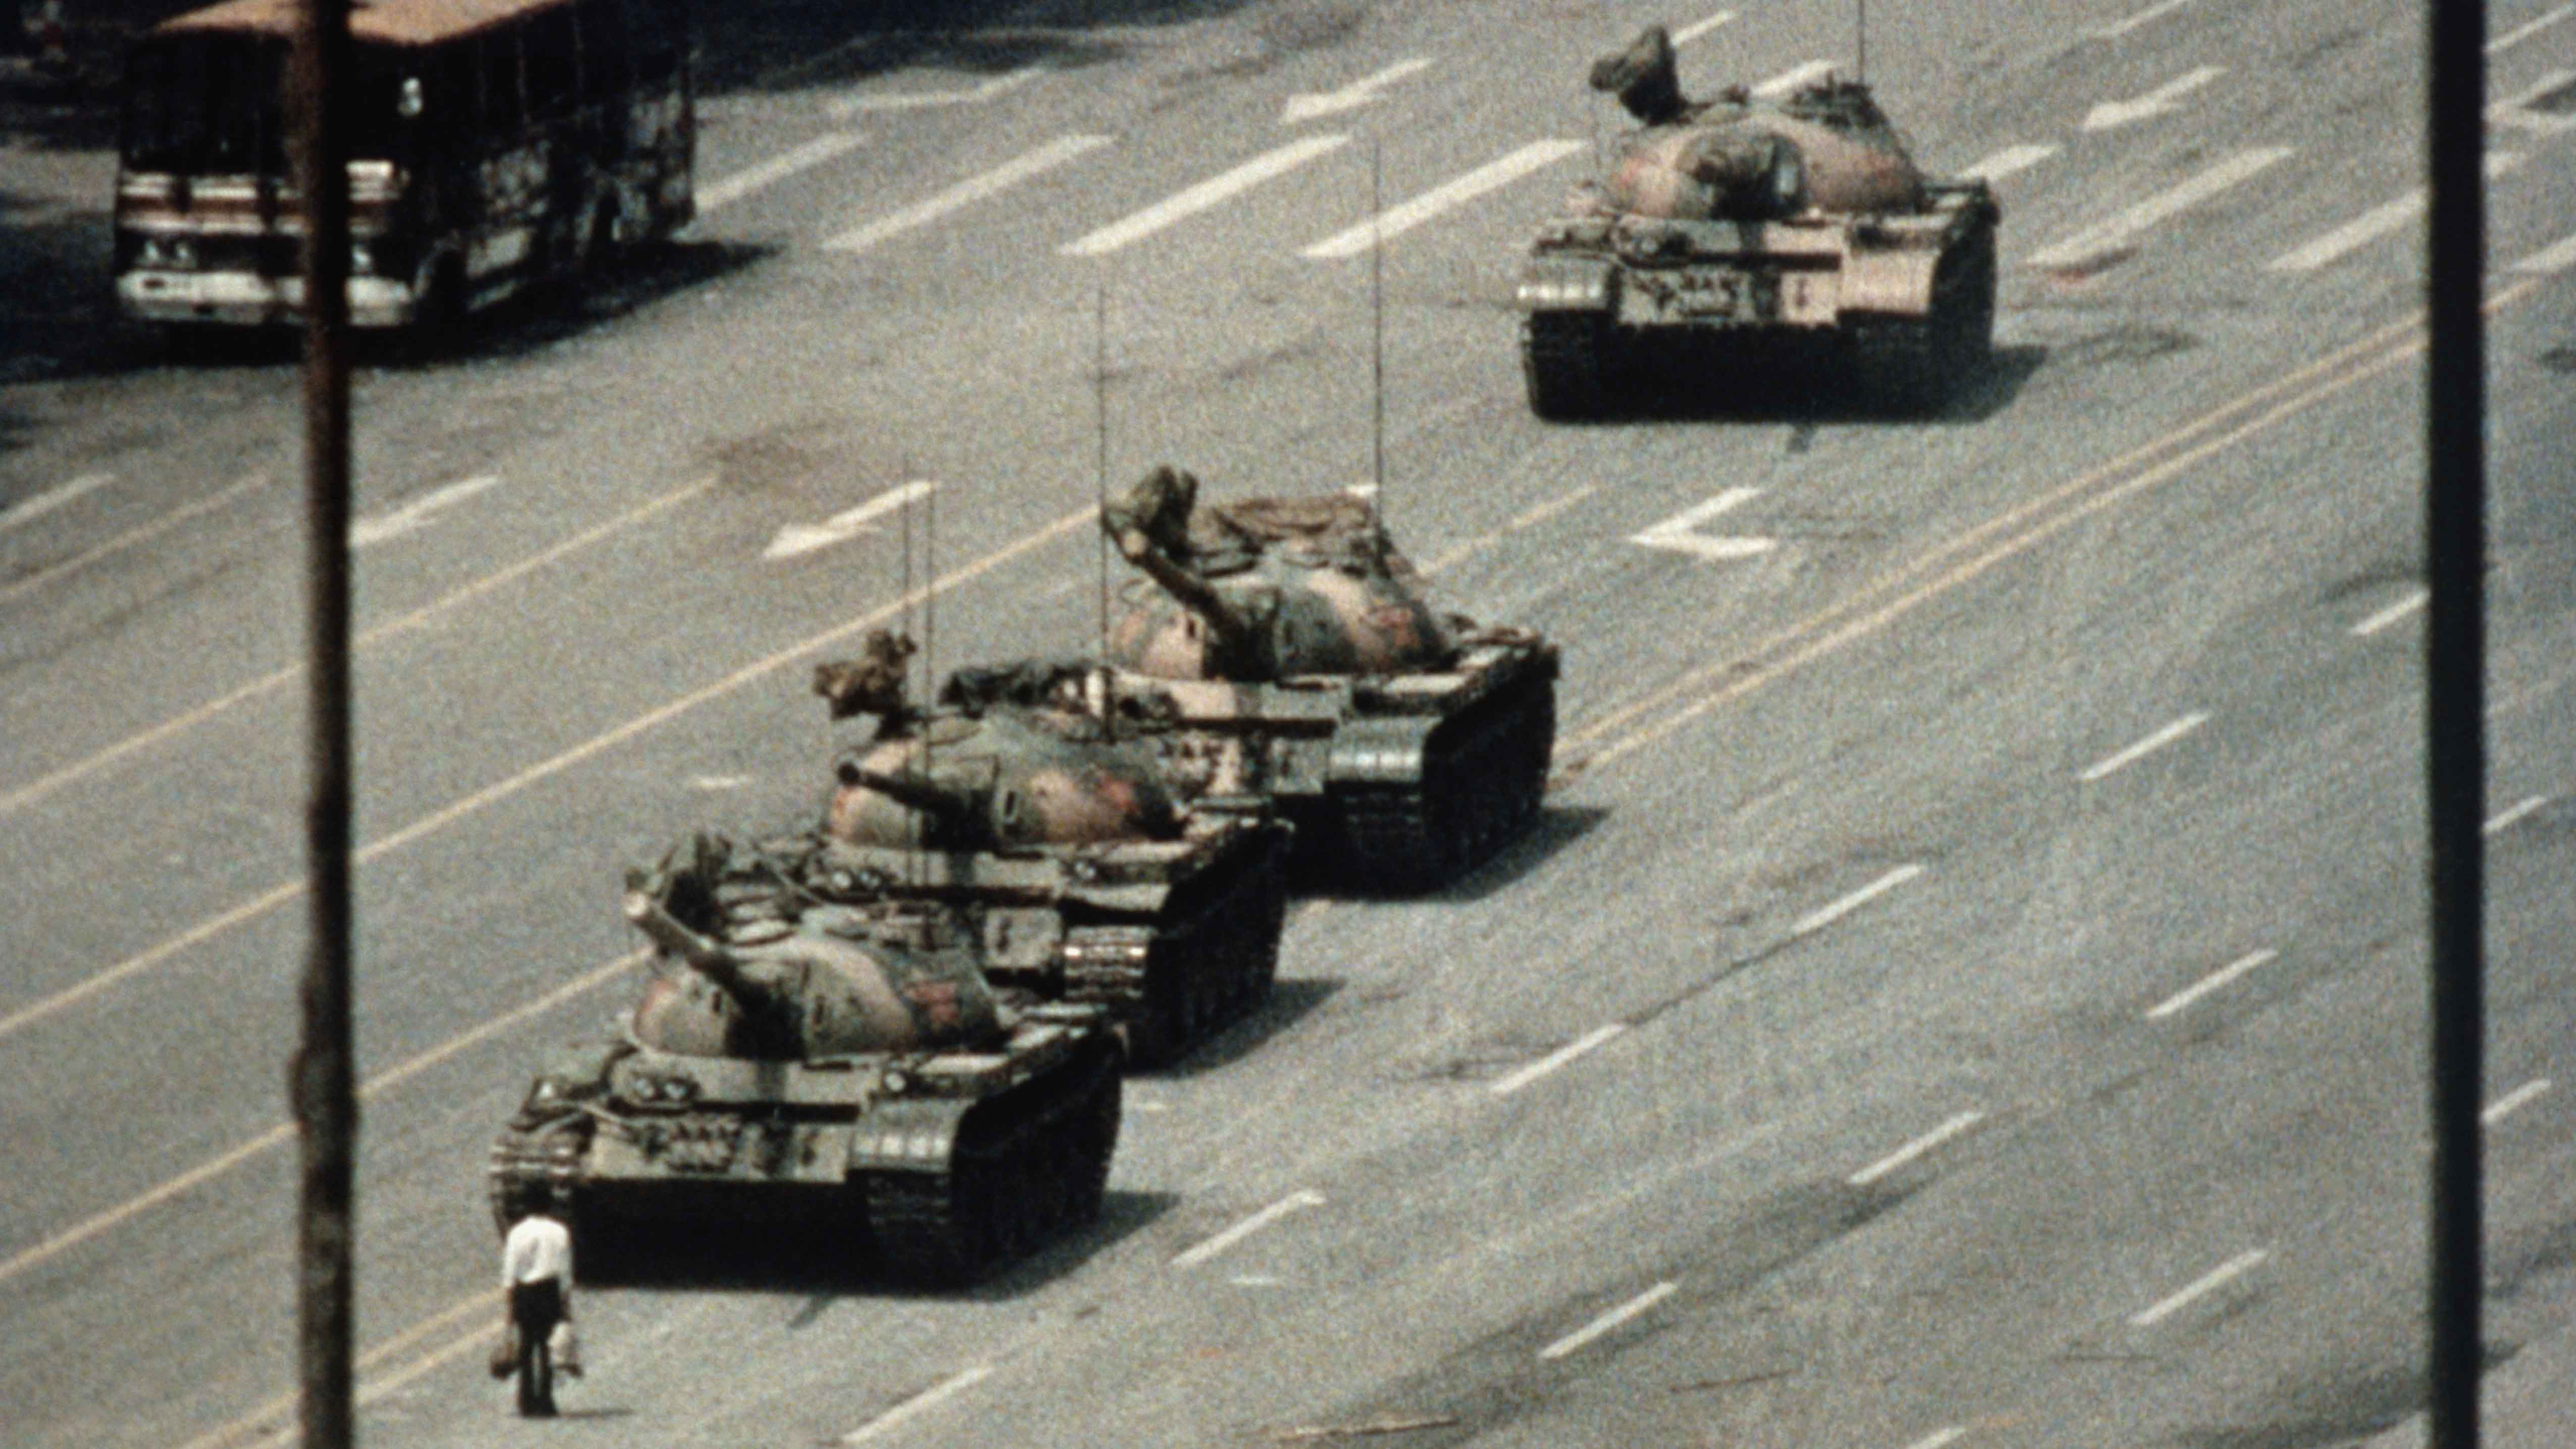 Tiananmen_Square_Tank-GettyImages-517198274.jpg